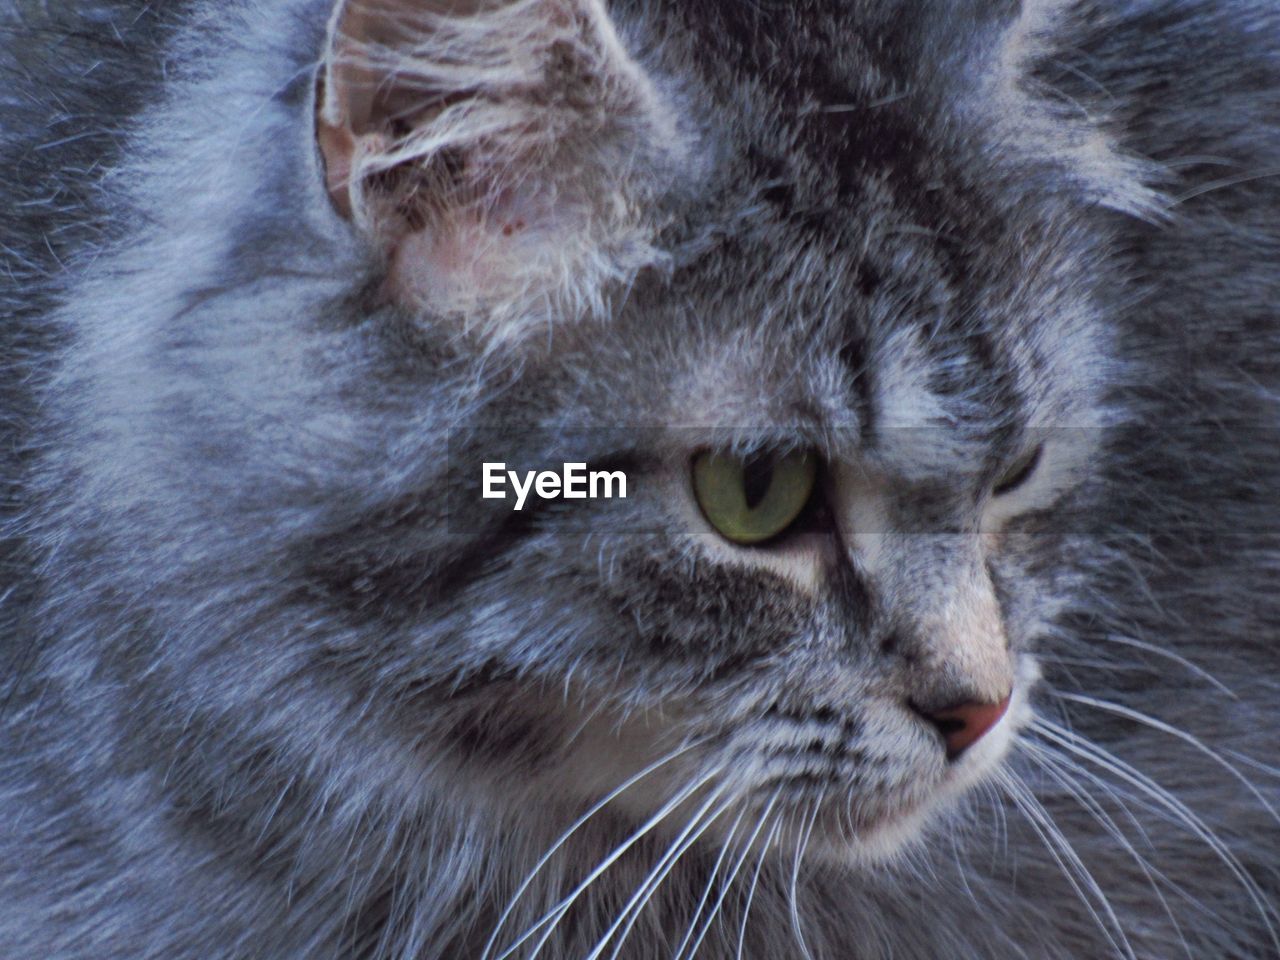 CLOSE-UP OF CAT WITH EYES